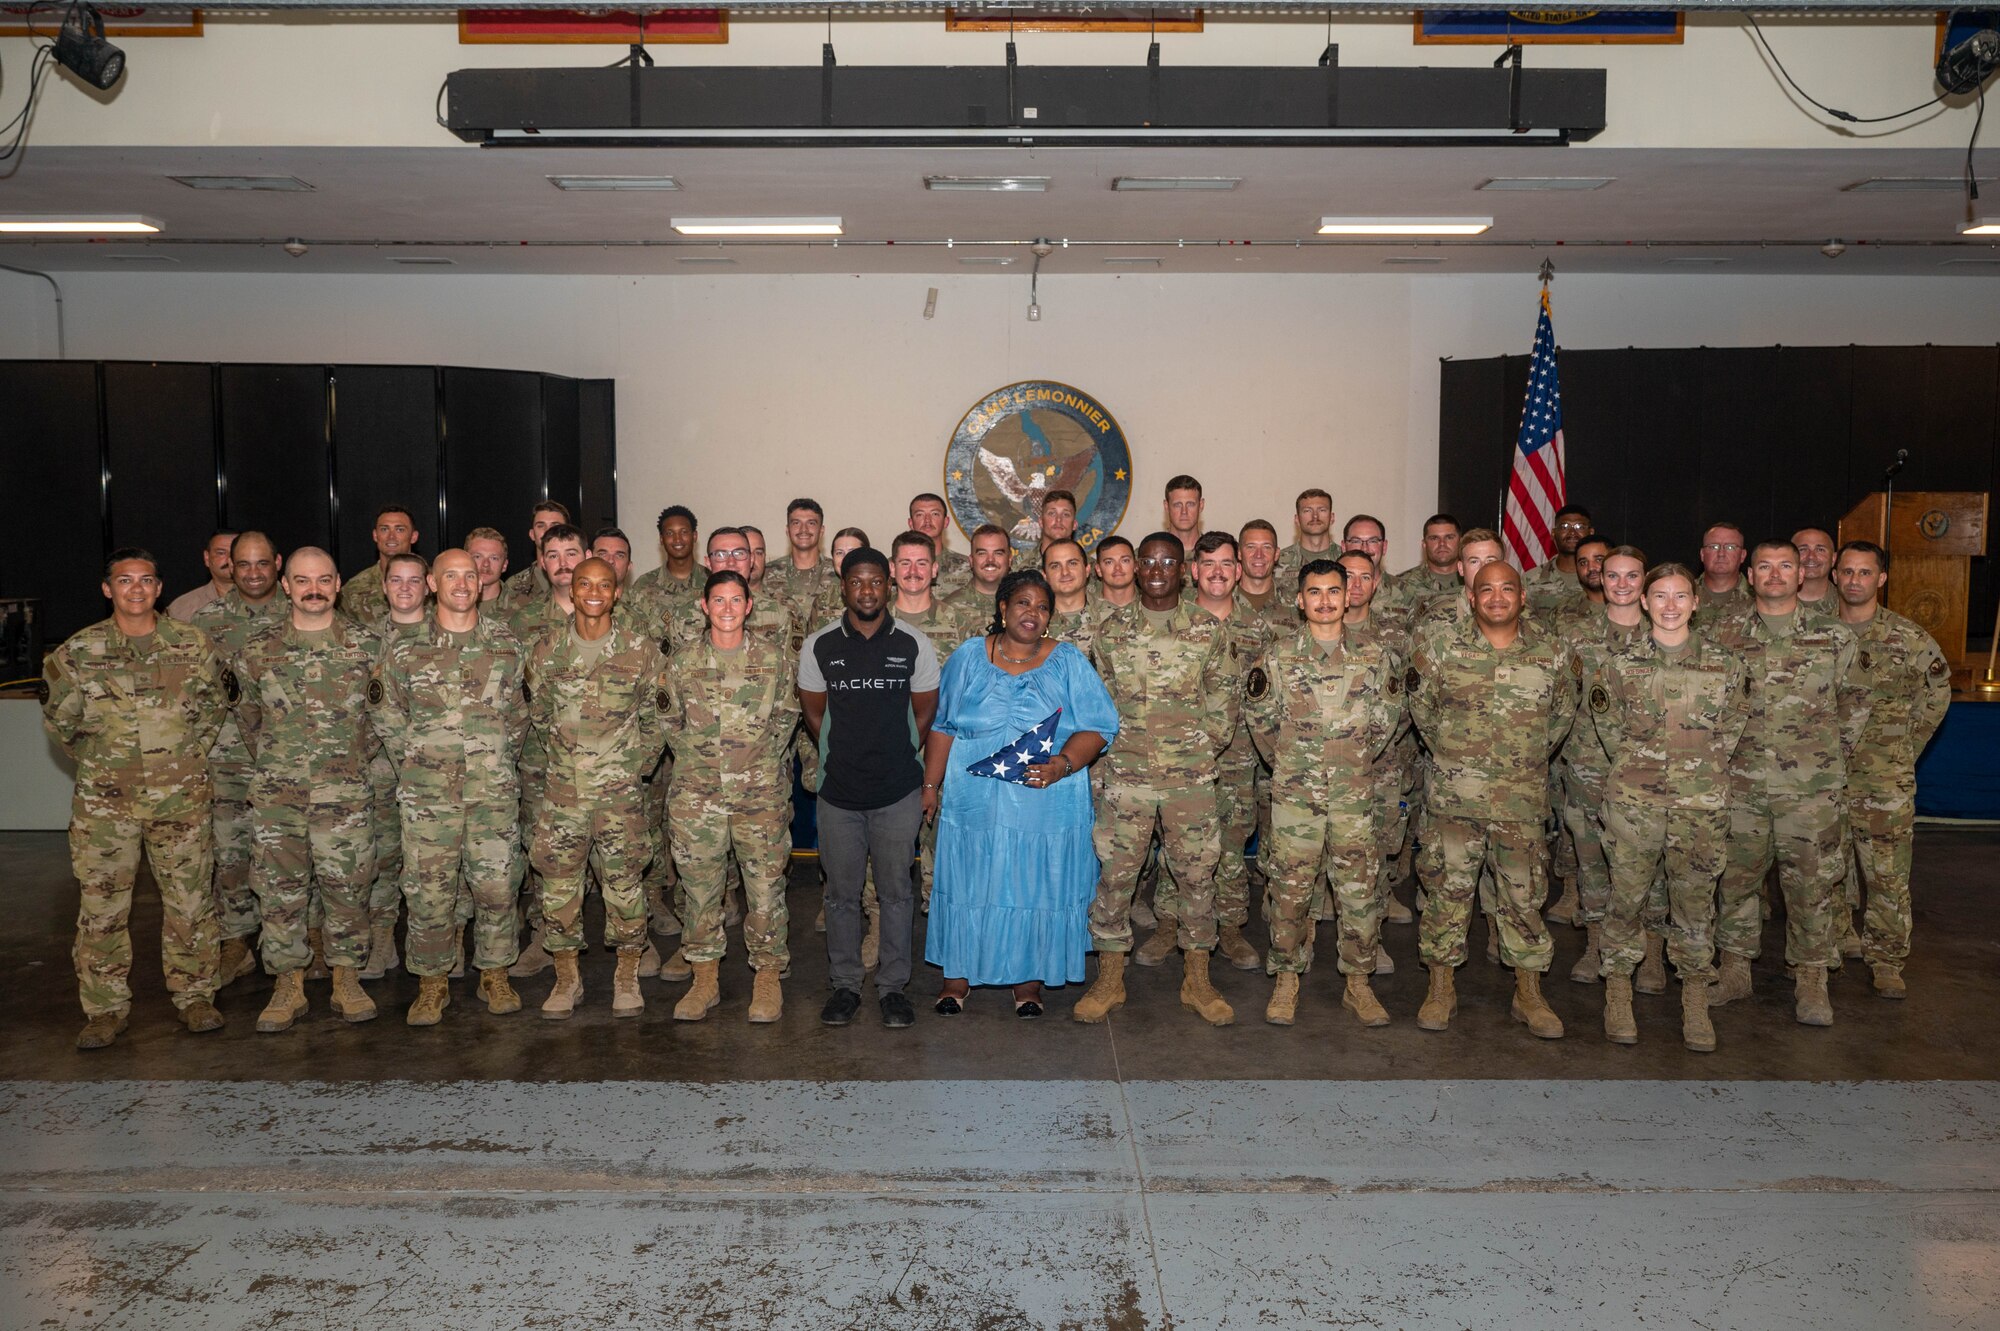 Group photo of U.S. servicemembers posing with the mother and brother of one of their Airmen.